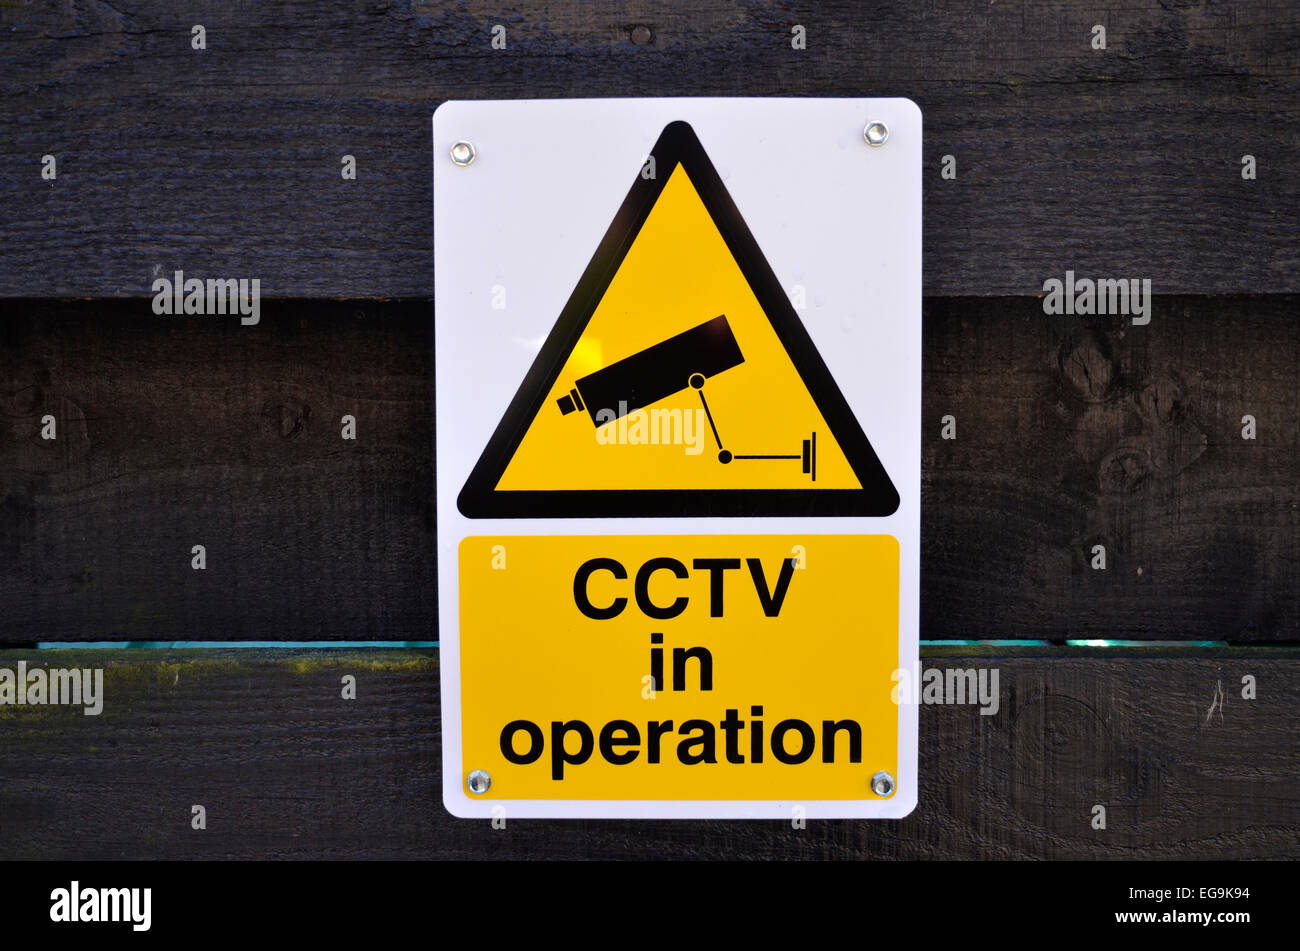 A CCTV camera sign on a wooden fence Stock Photo